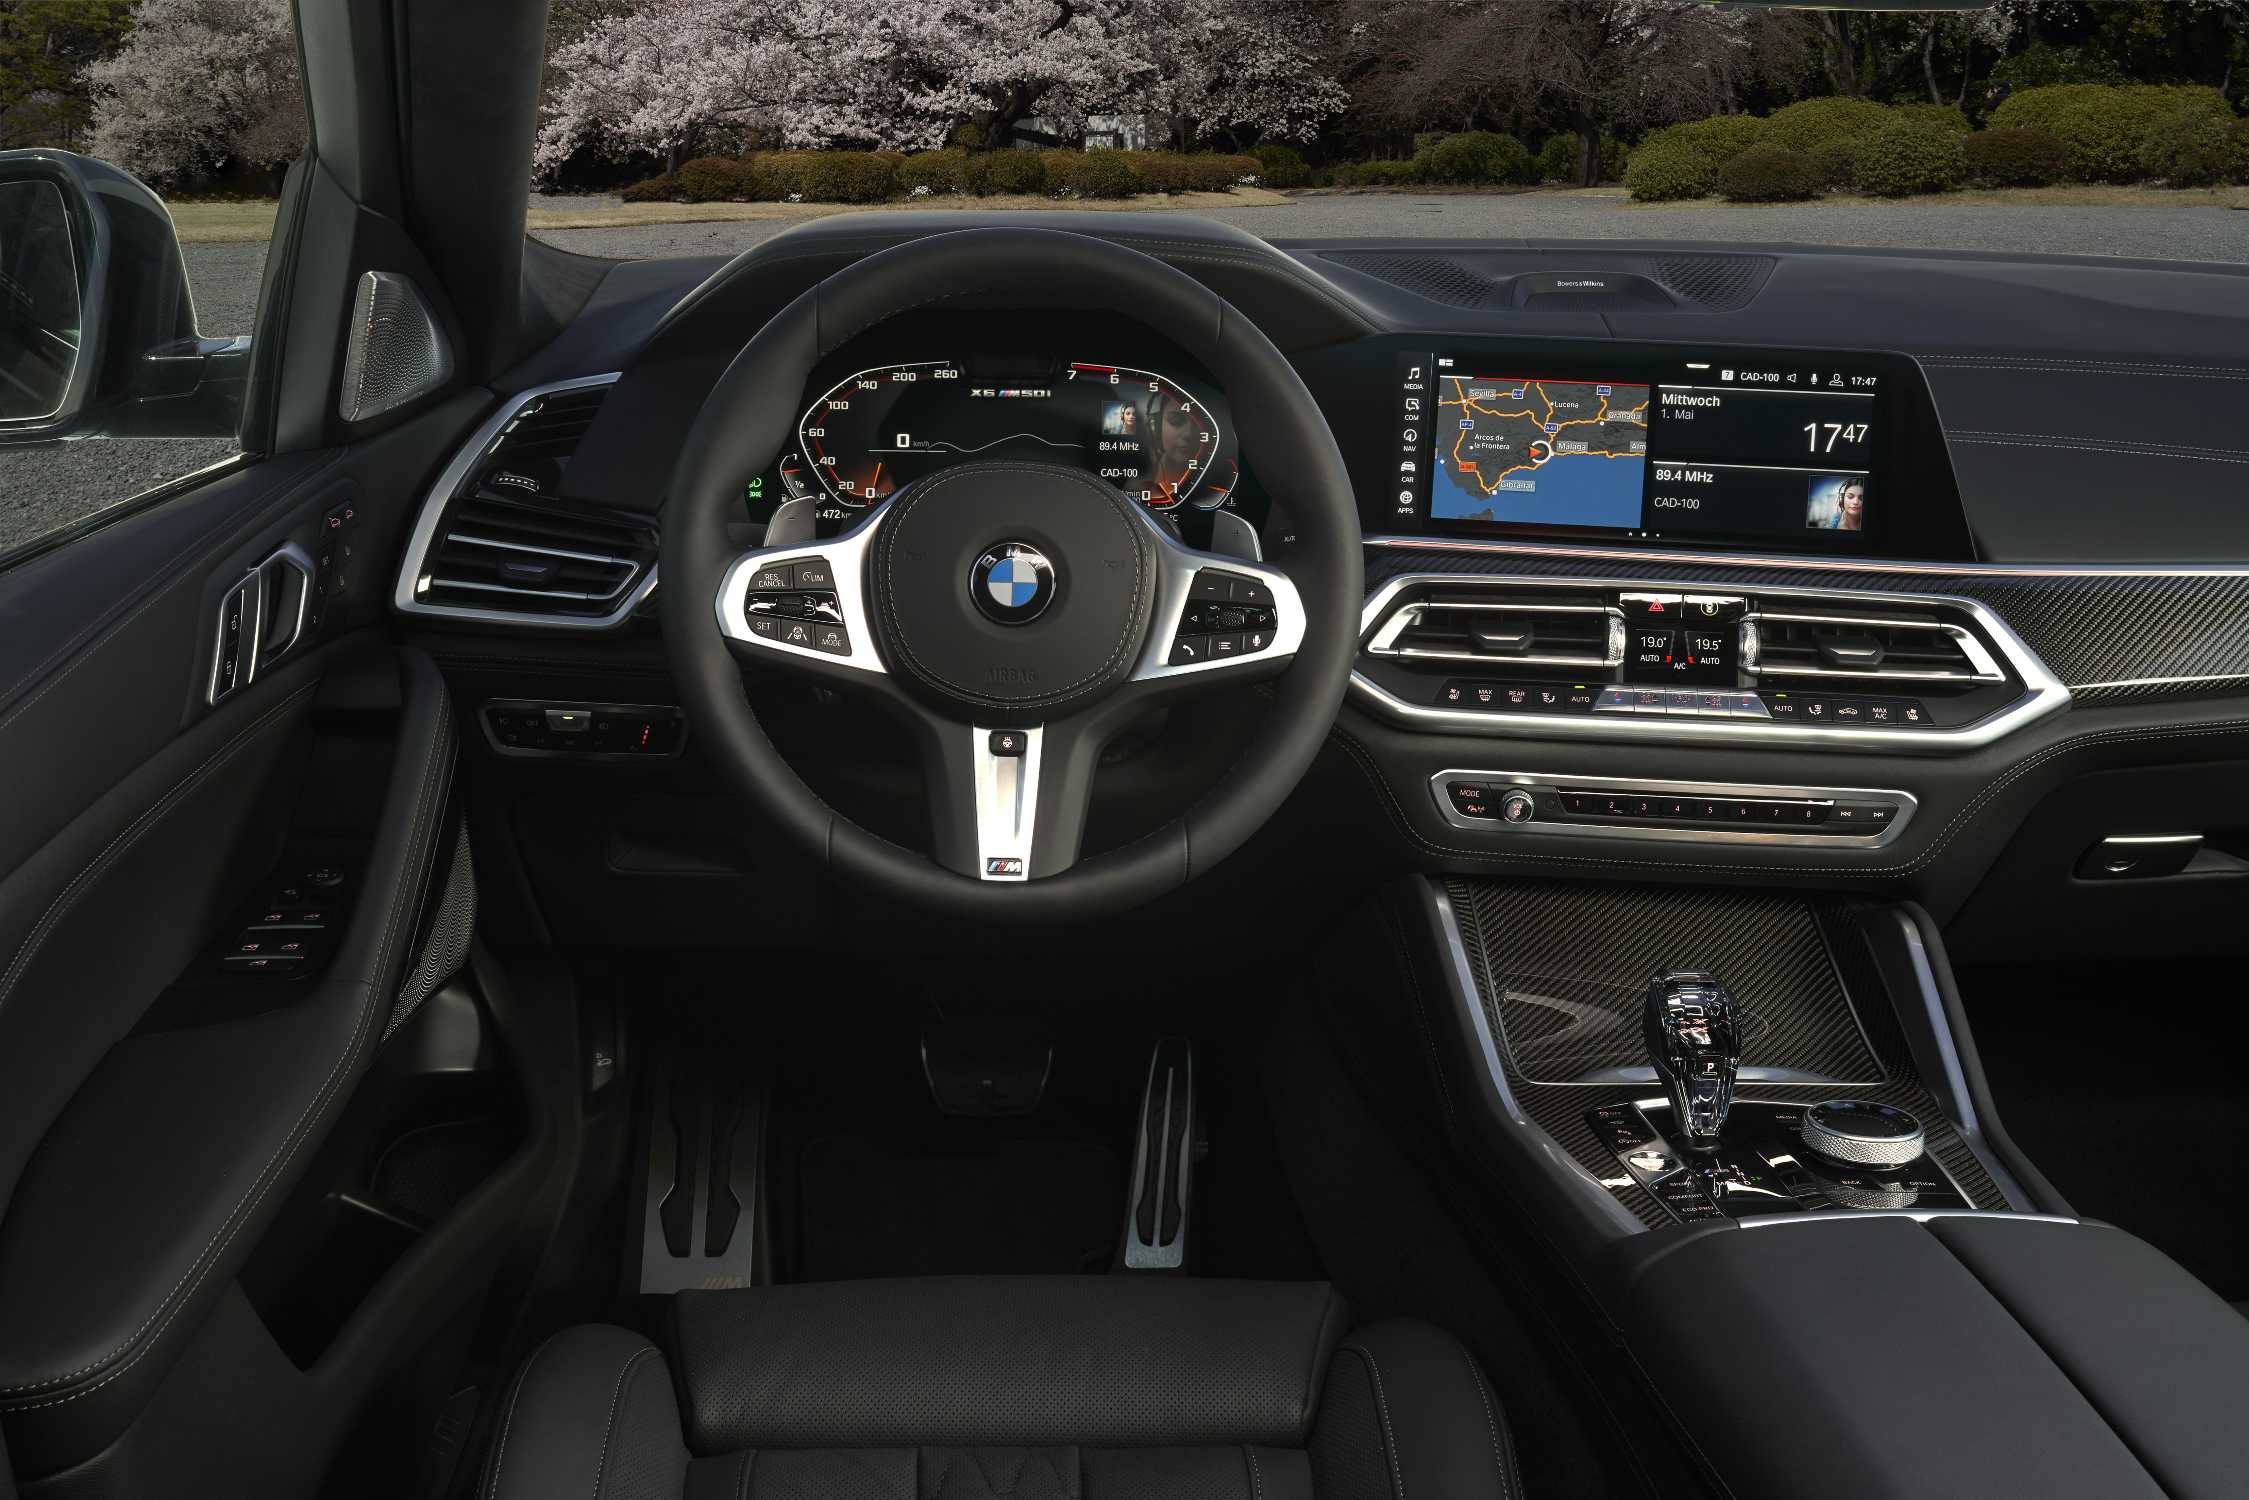 The new BMW – Interieur and Details (07/2019).